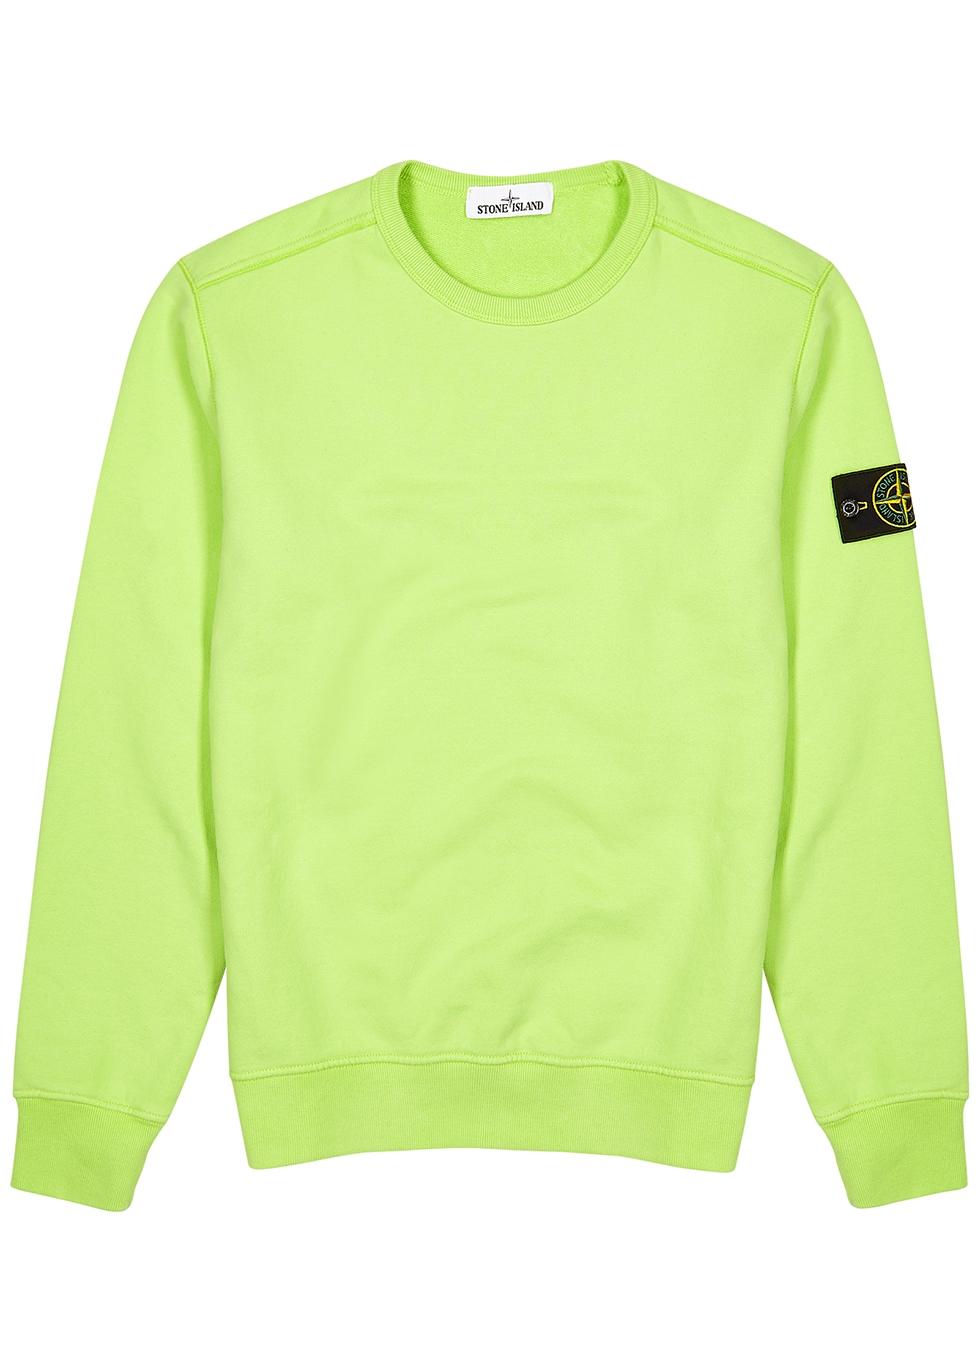 Stone Island Crew Neck Cotton Sweatshirt in Green for Men gym and workout clothes Sweatshirts Mens Clothing Activewear 